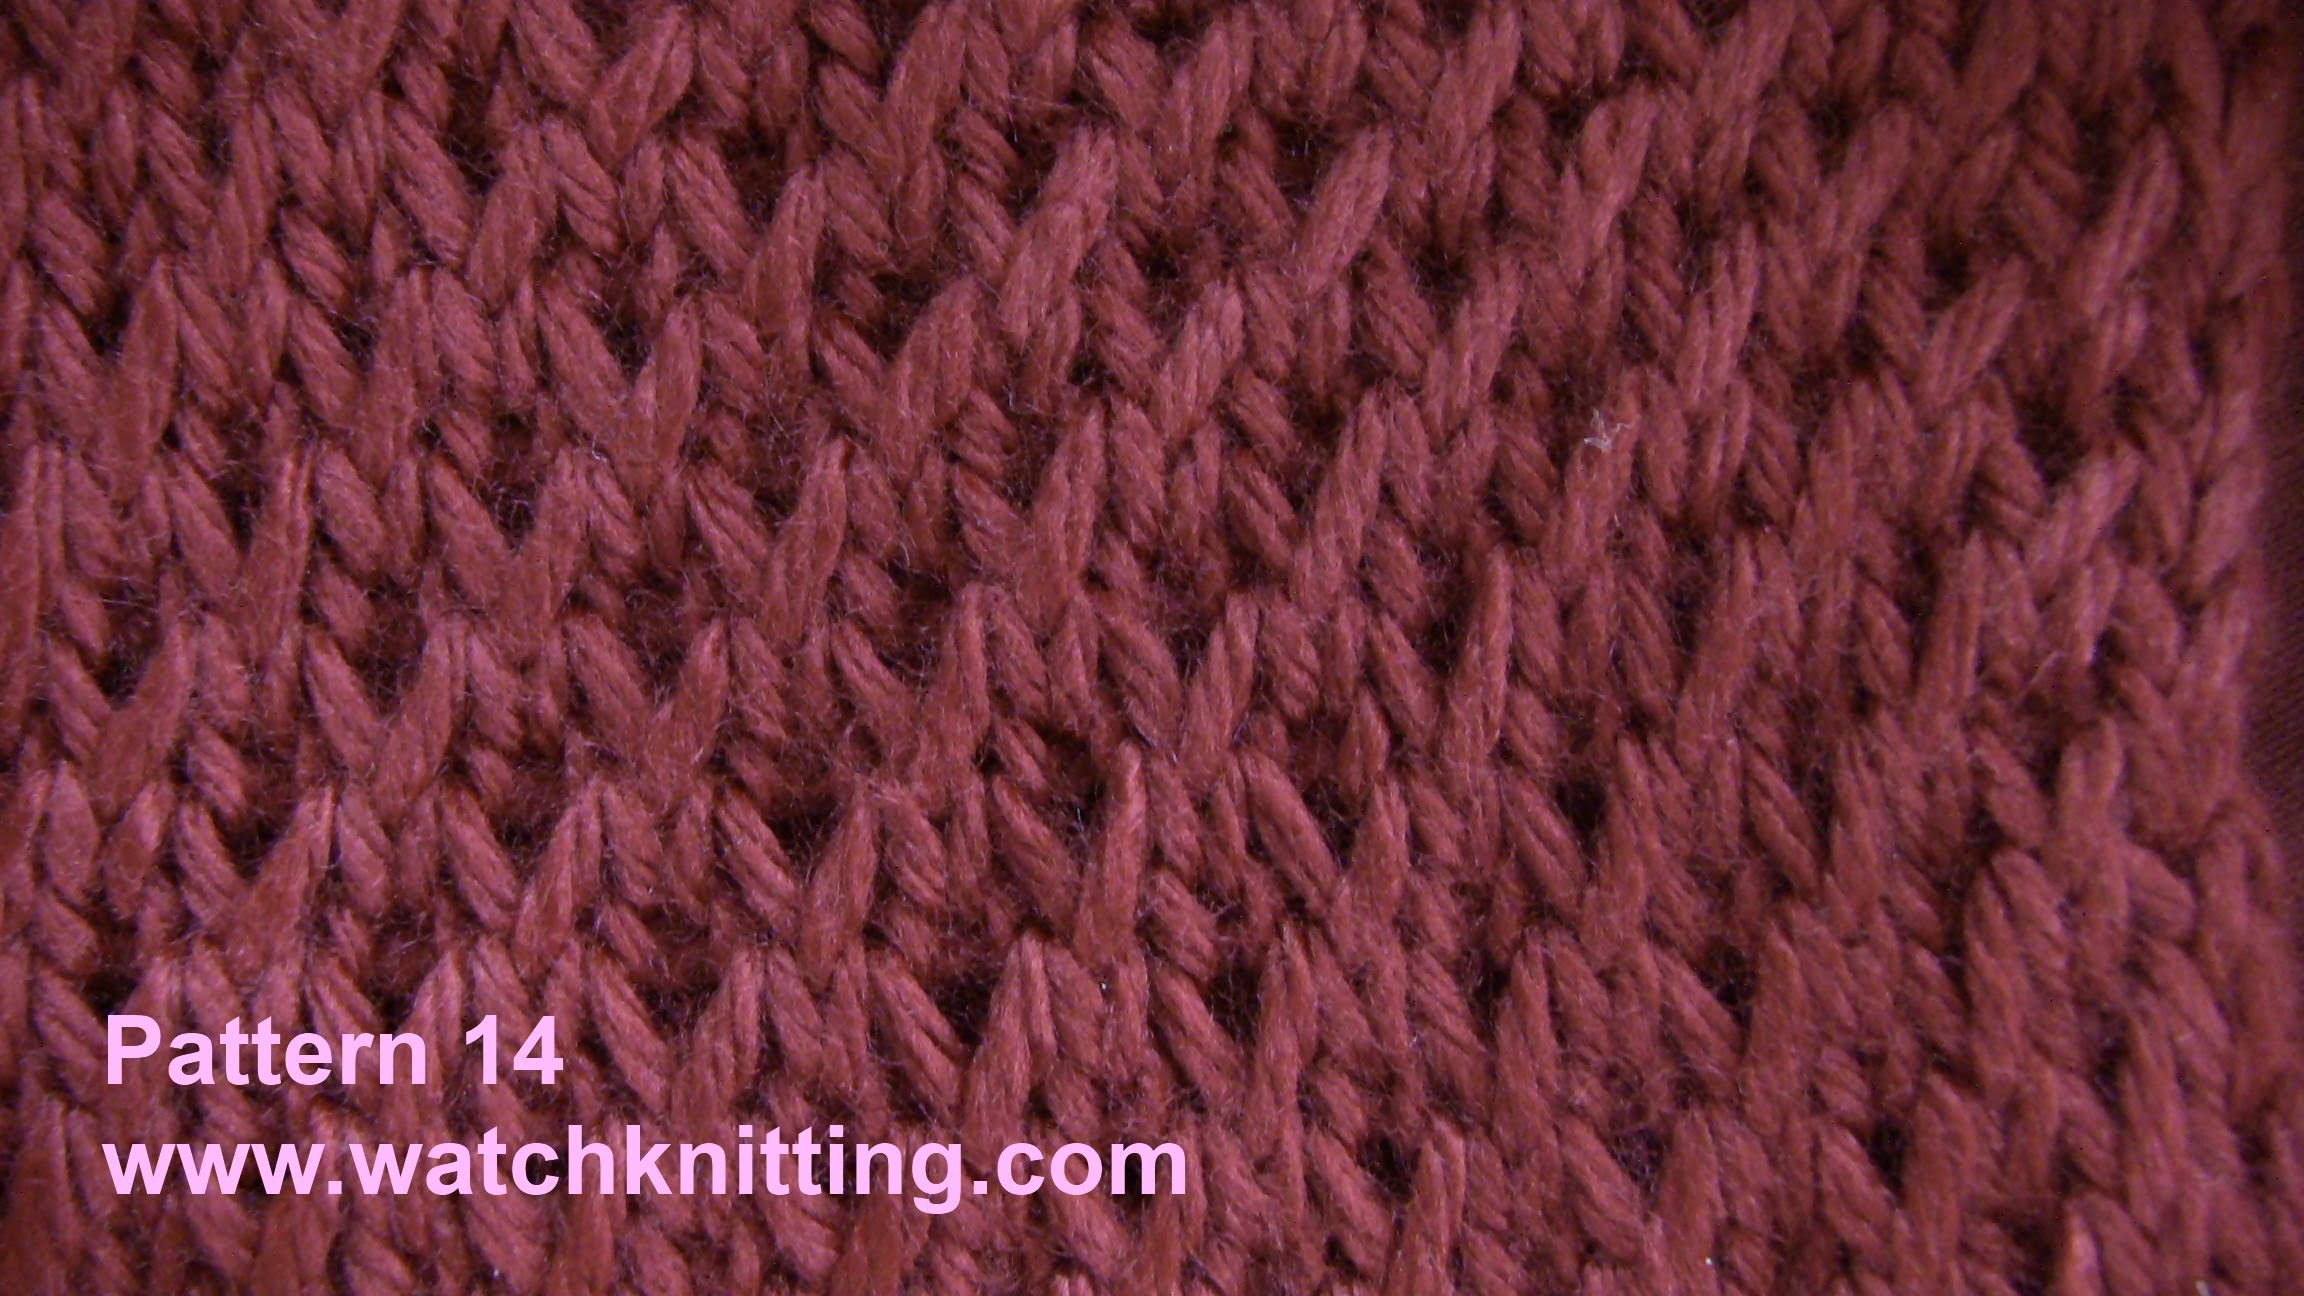 easy knitting patterns simulated brioche stitch - free knitting tutorial - watch knitting - pattern hdnemoc